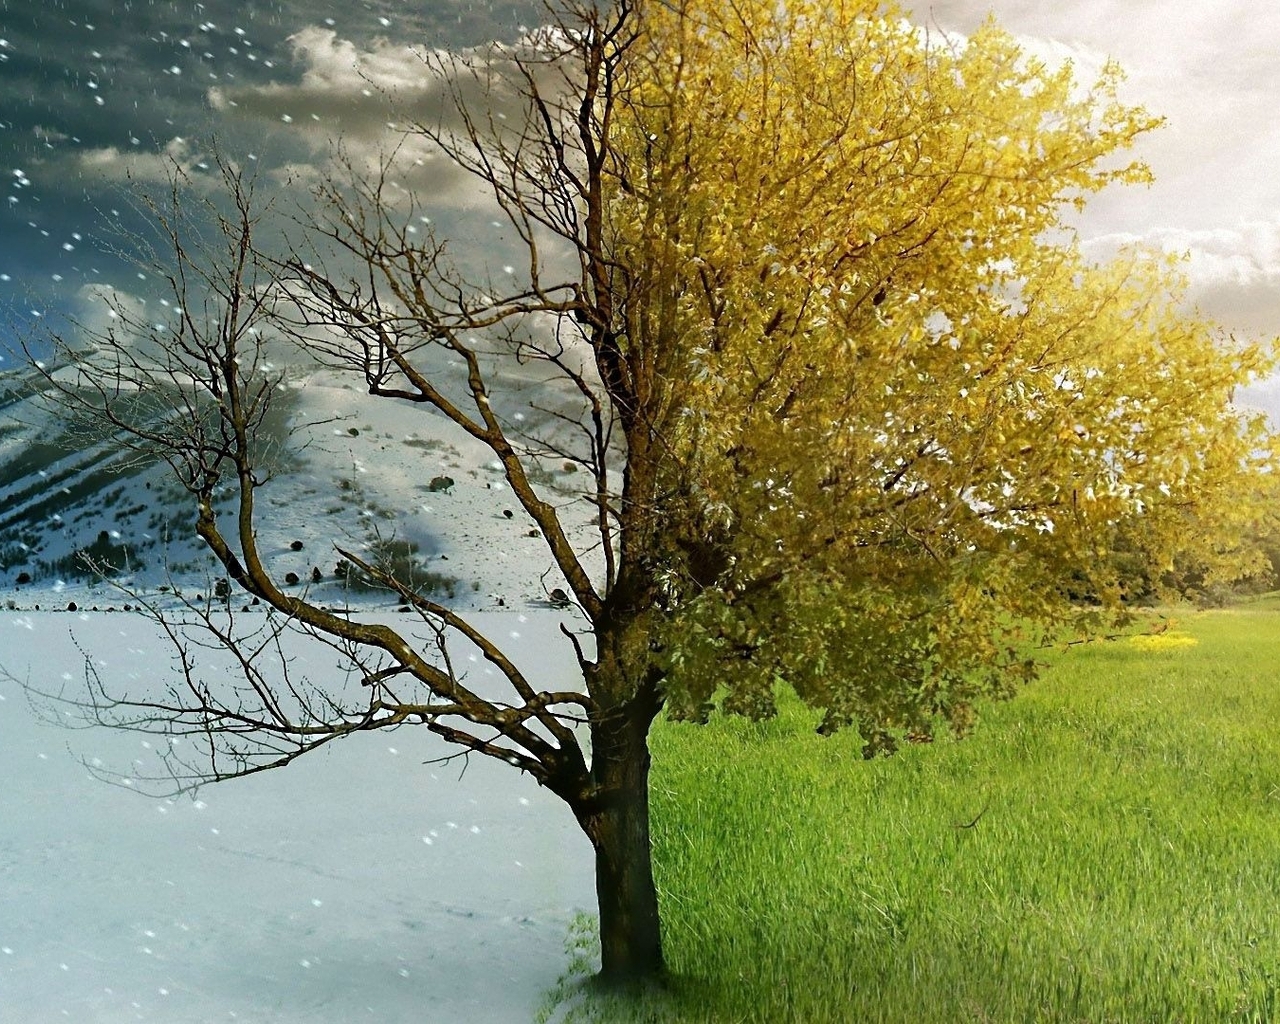 Image: Winter, summer, tree, mountain, snow, sky, clouds, leaves, twigs, grass, field